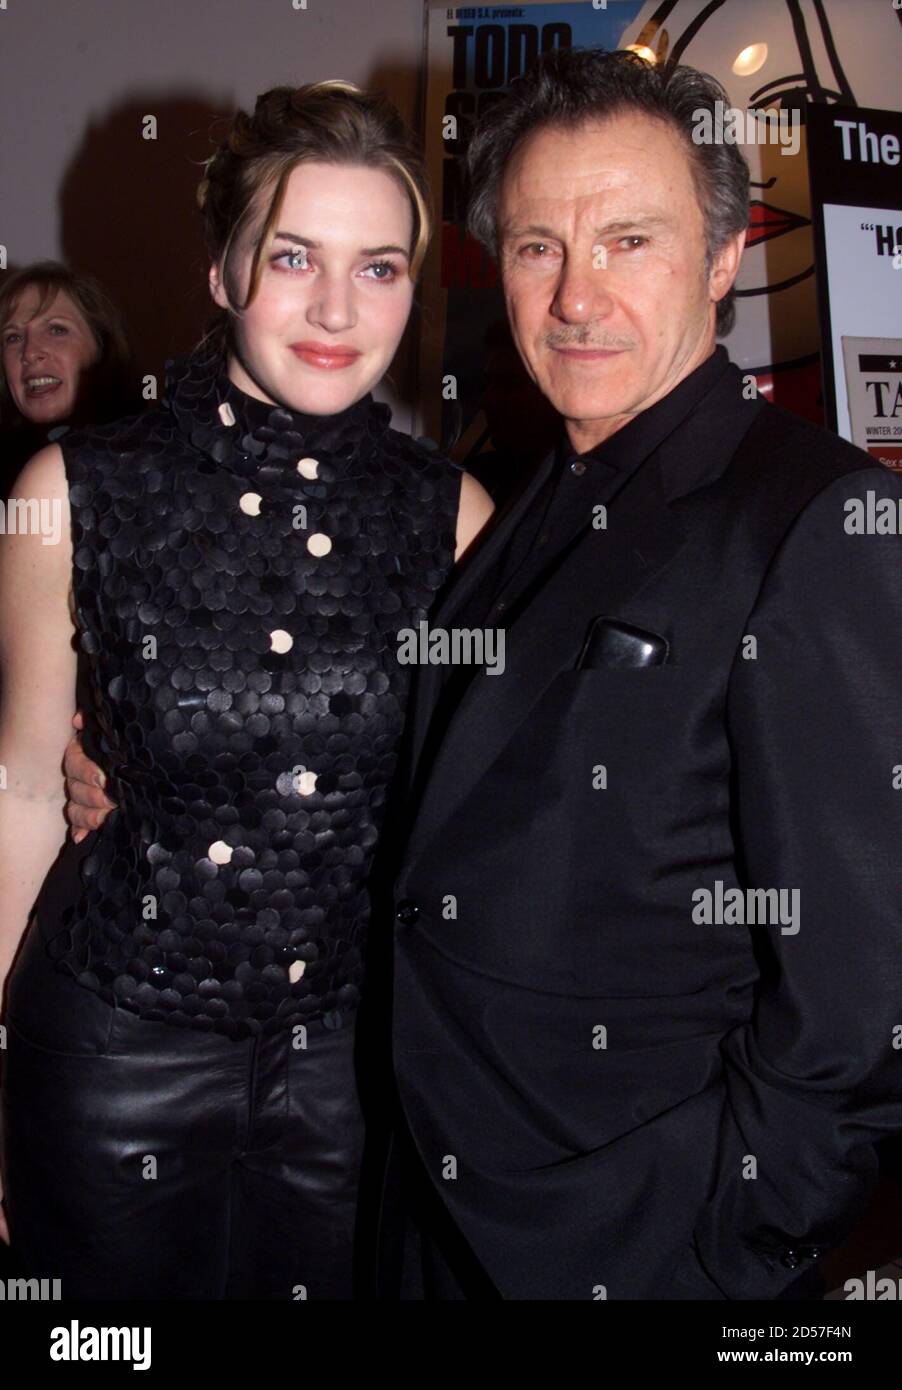 Actress Kate Winslet and Harvey Keitel, stars the drama film " Holy Smoke", pose together at the film's premiere January 12 in Hollywood. The film is about a